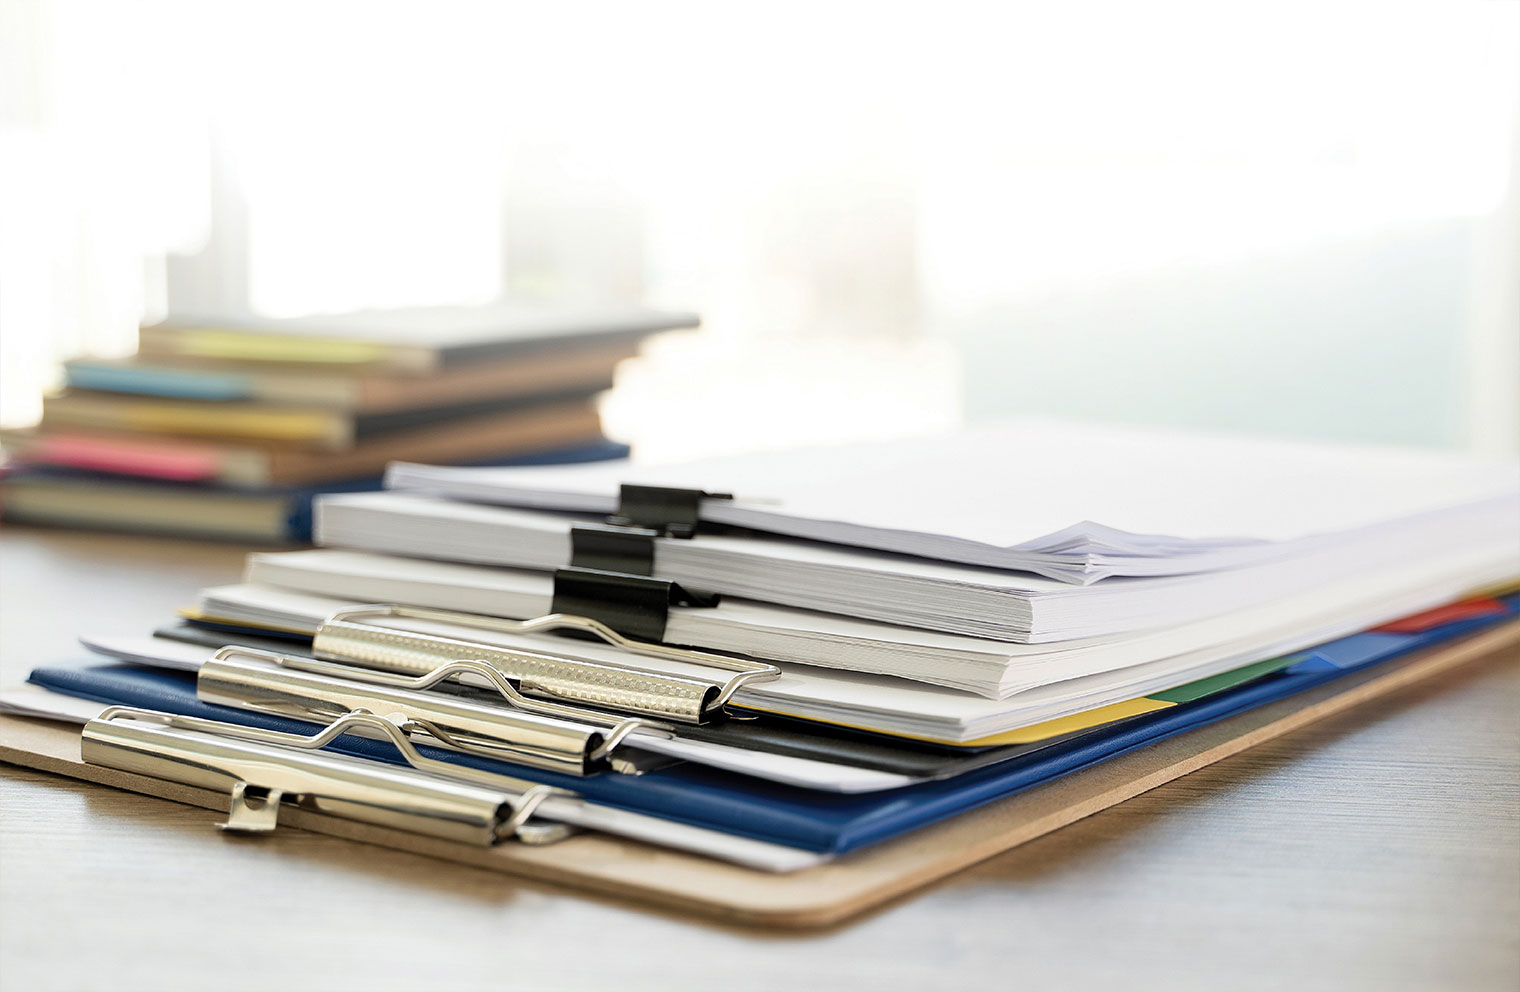 Image showing a stack of clipboards on top of desk.